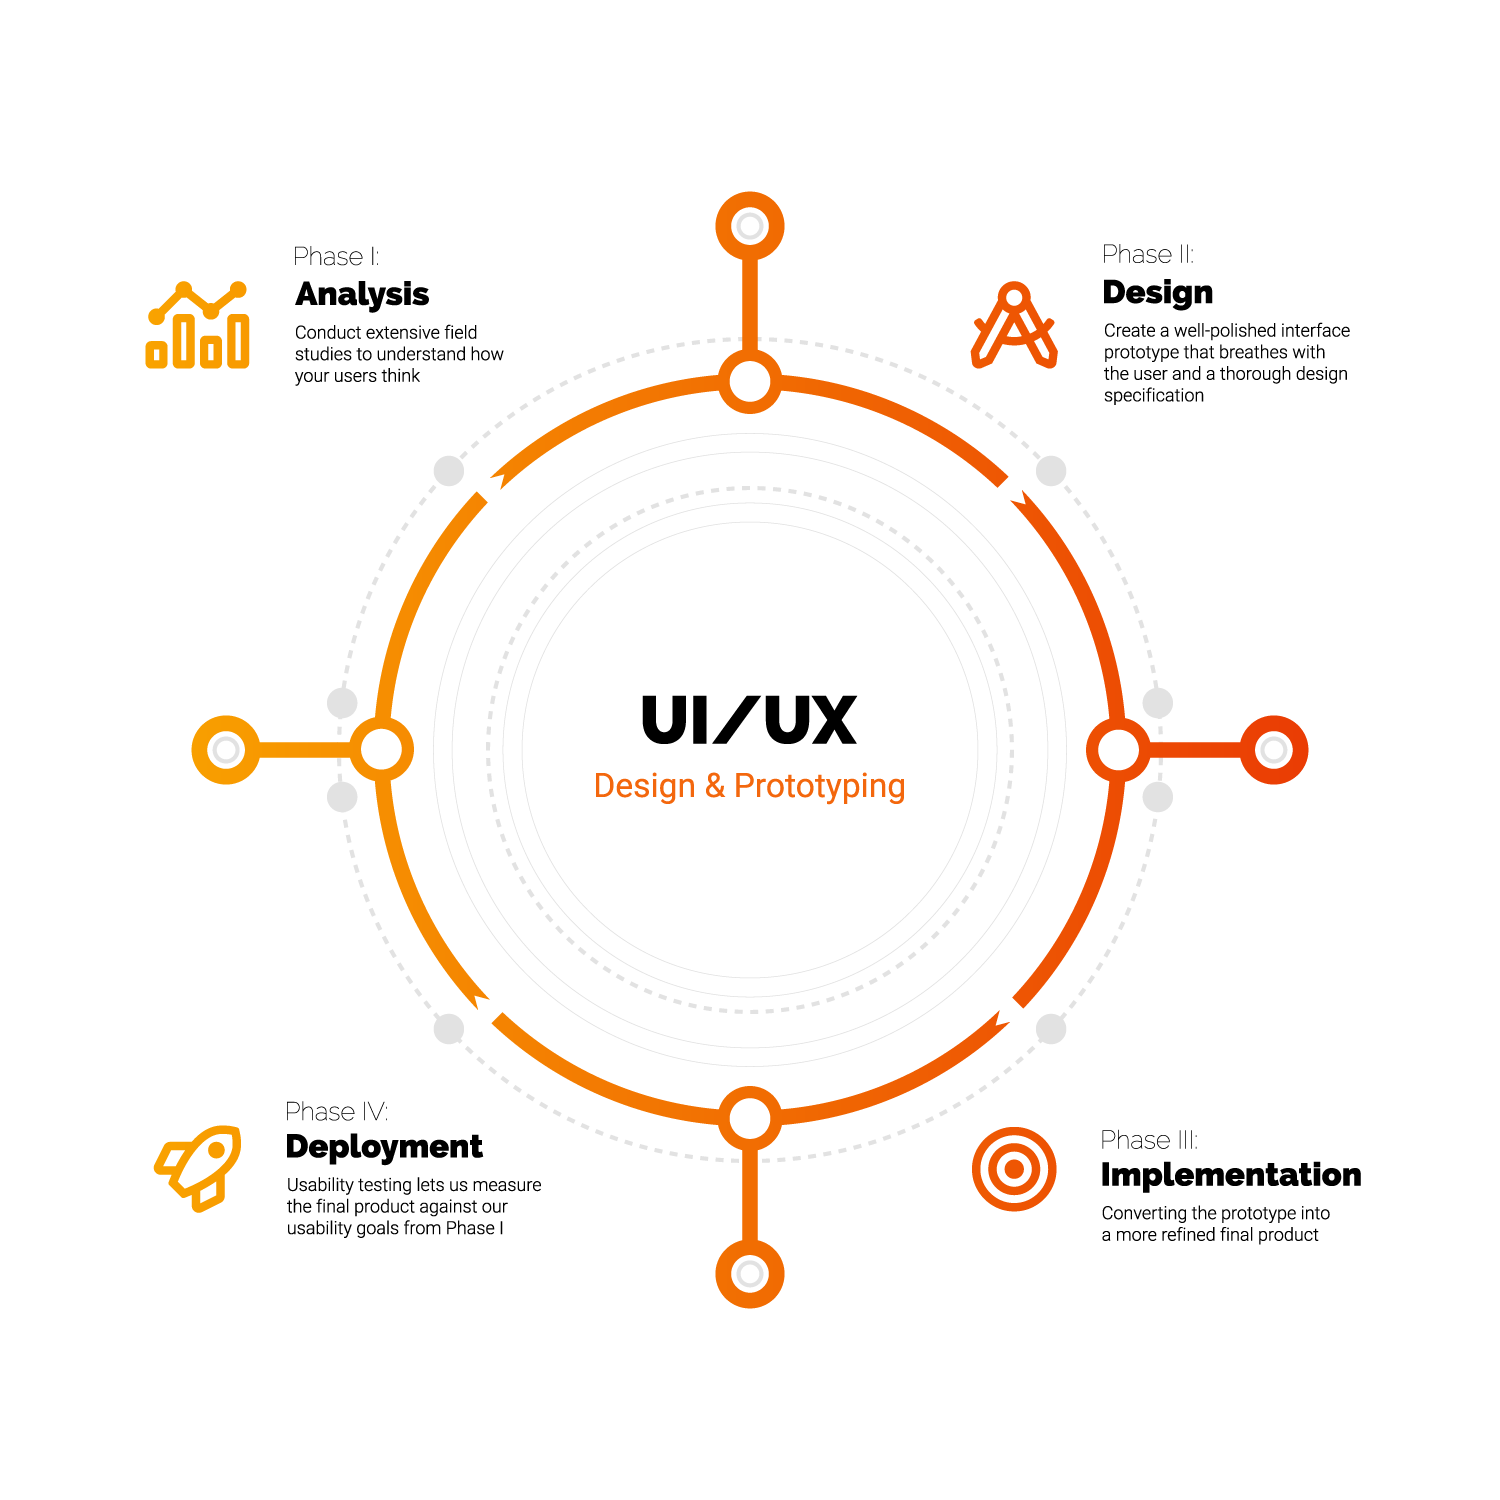 Fyresite's UI/UX Process depicted in a four-part circular graphic